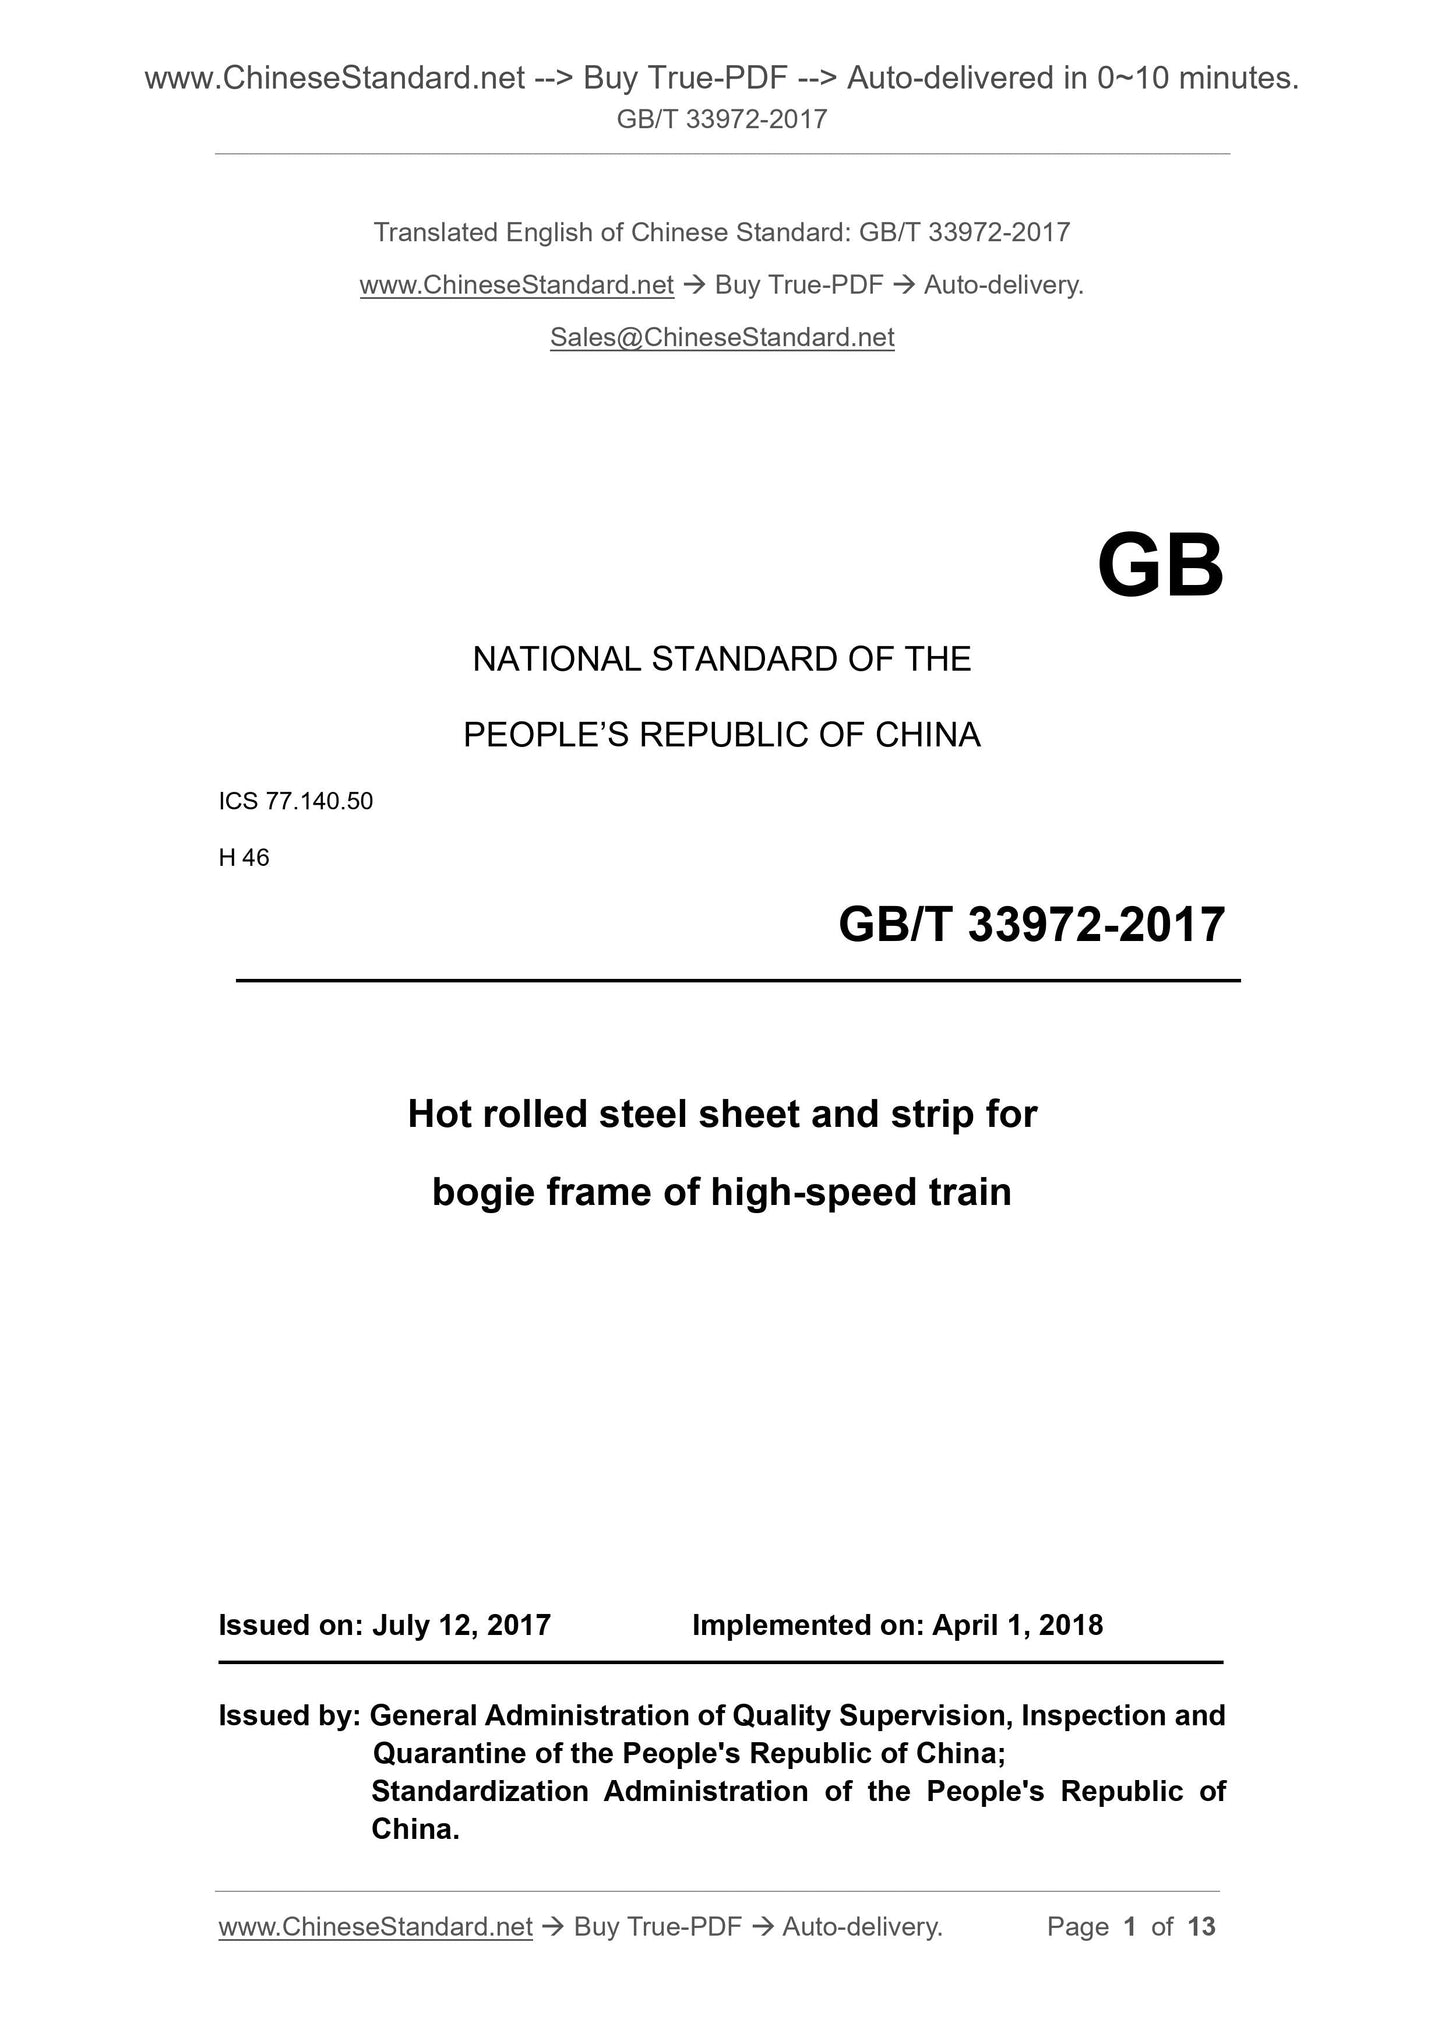 GB/T 33972-2017 Page 1